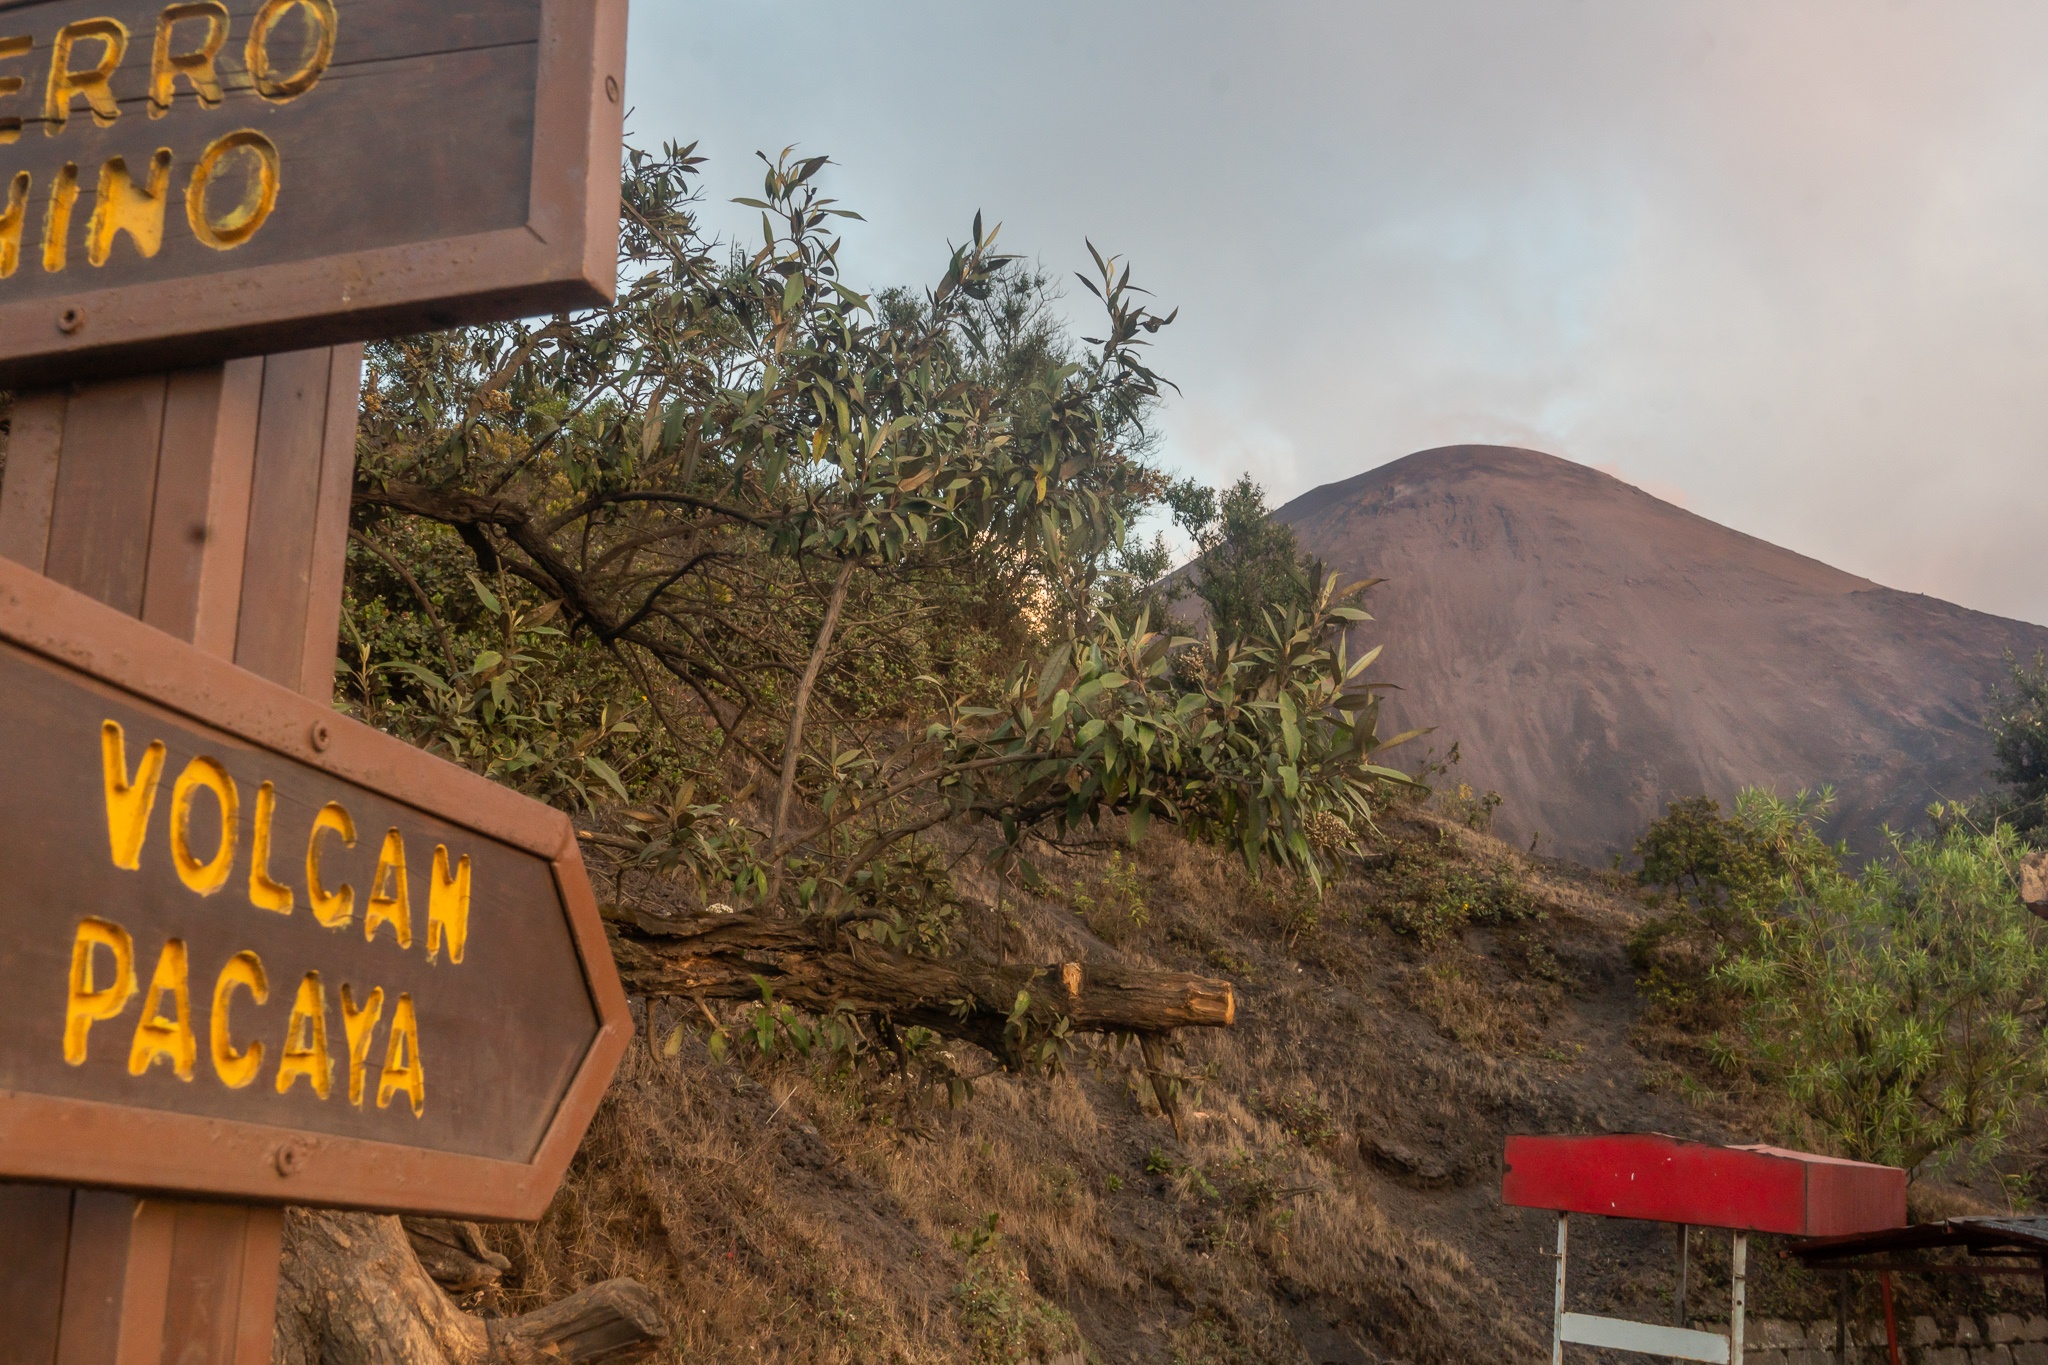 A sign points to Volcan Pacaya